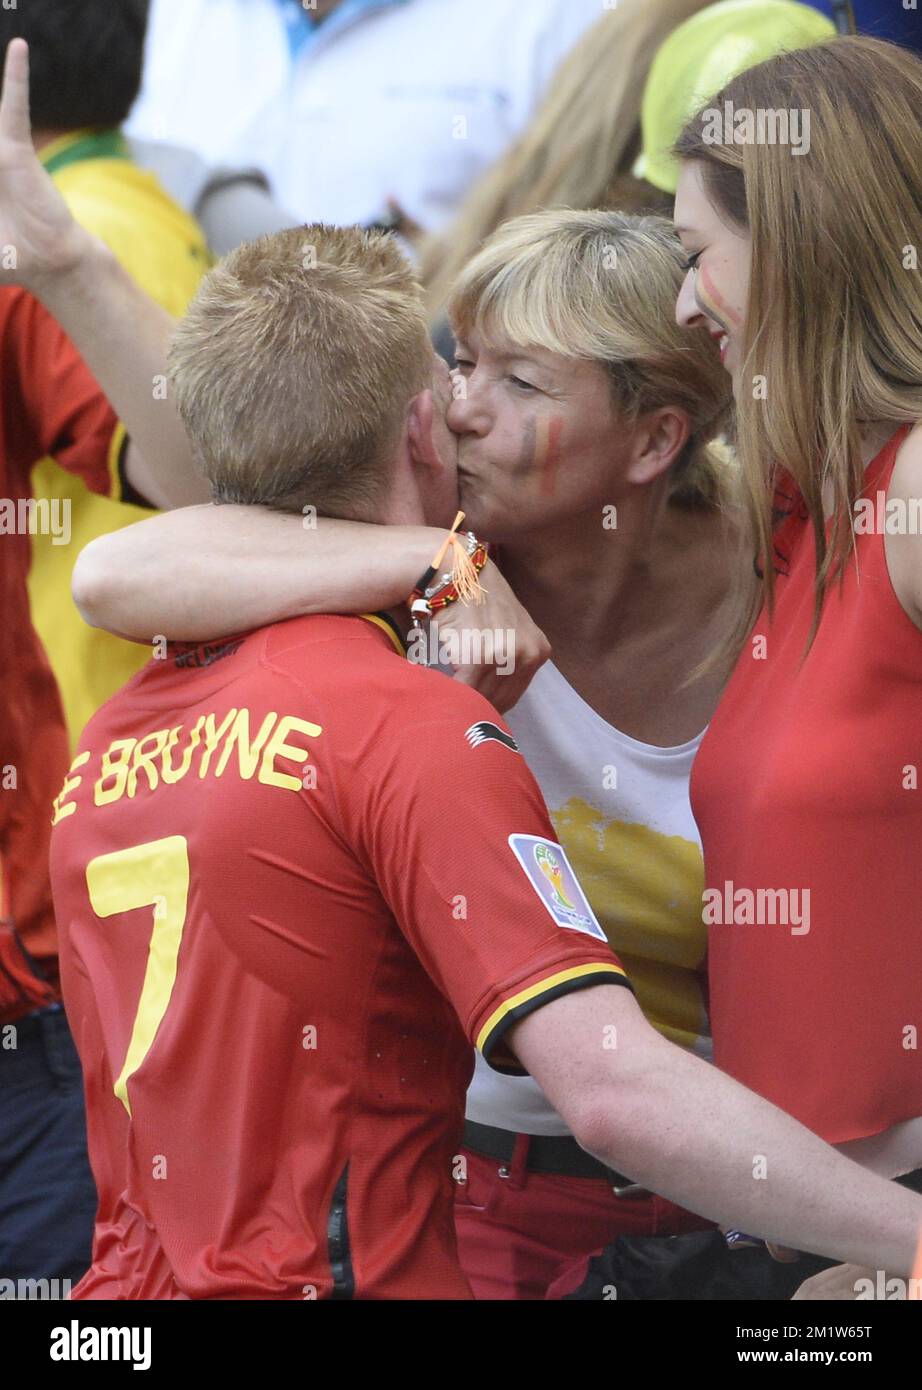 20140622 - RIO DE JANEIRO, BRAZIL: Belgium's Kevin De Bruyne celebrates with his mother after winning a soccer game between Belgian national team The Red Devils and Russia in Rio de Janeiro, Brazil, the second game in Group H of the first round of the 2014 FIFA World Cup, Sunday 22 June 2014.   BELGA PHOTO DIRK WAEM Stock Photo